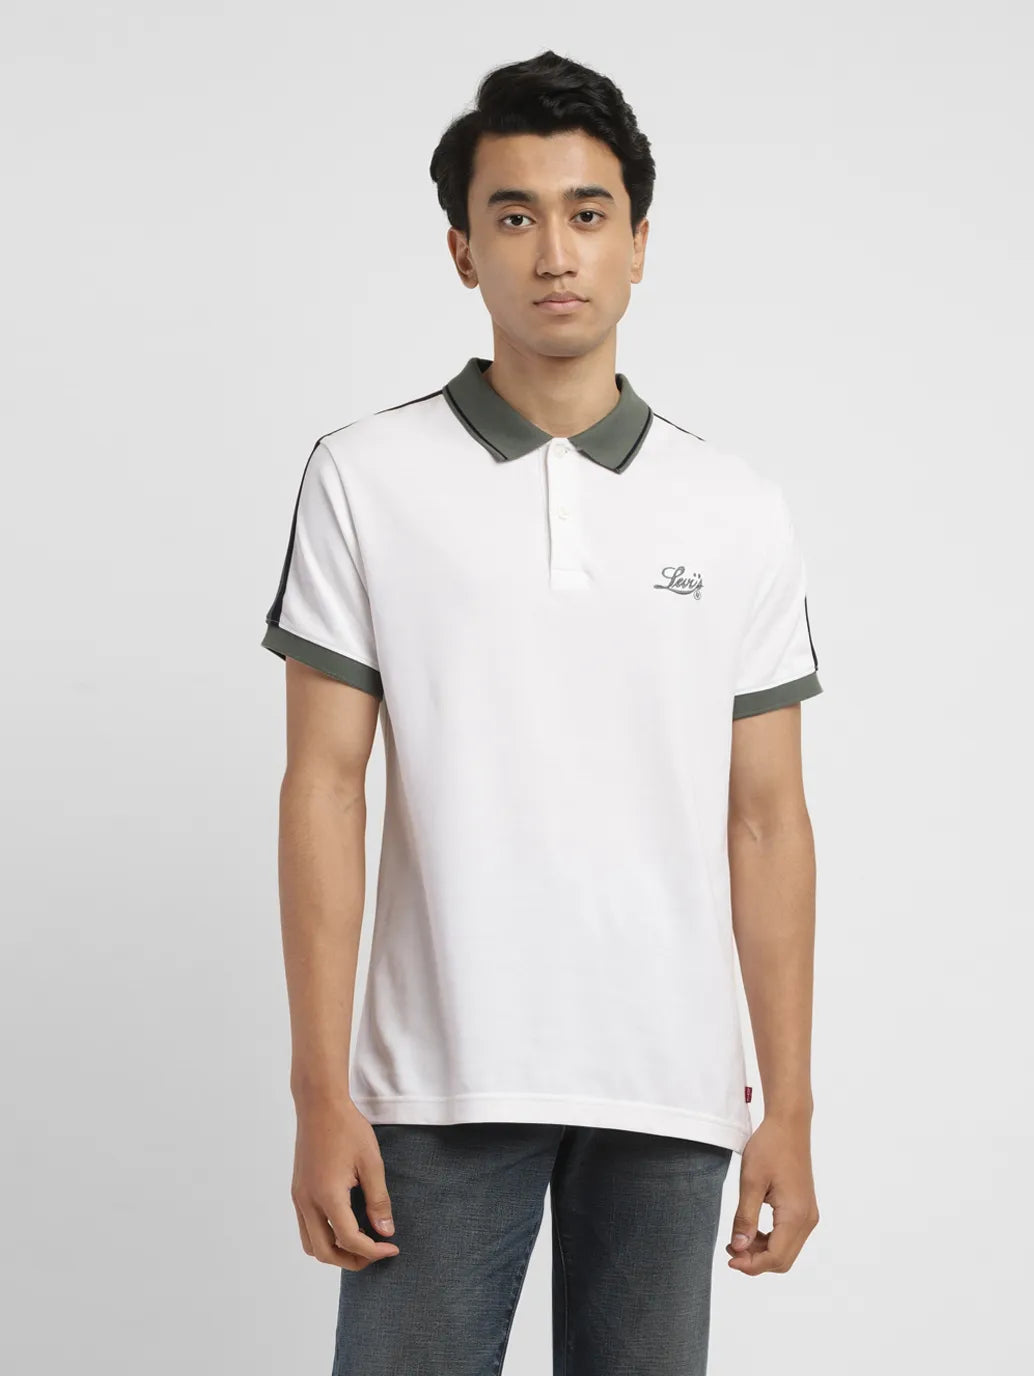 Men's Solid Slim Fit Polo T-shirt